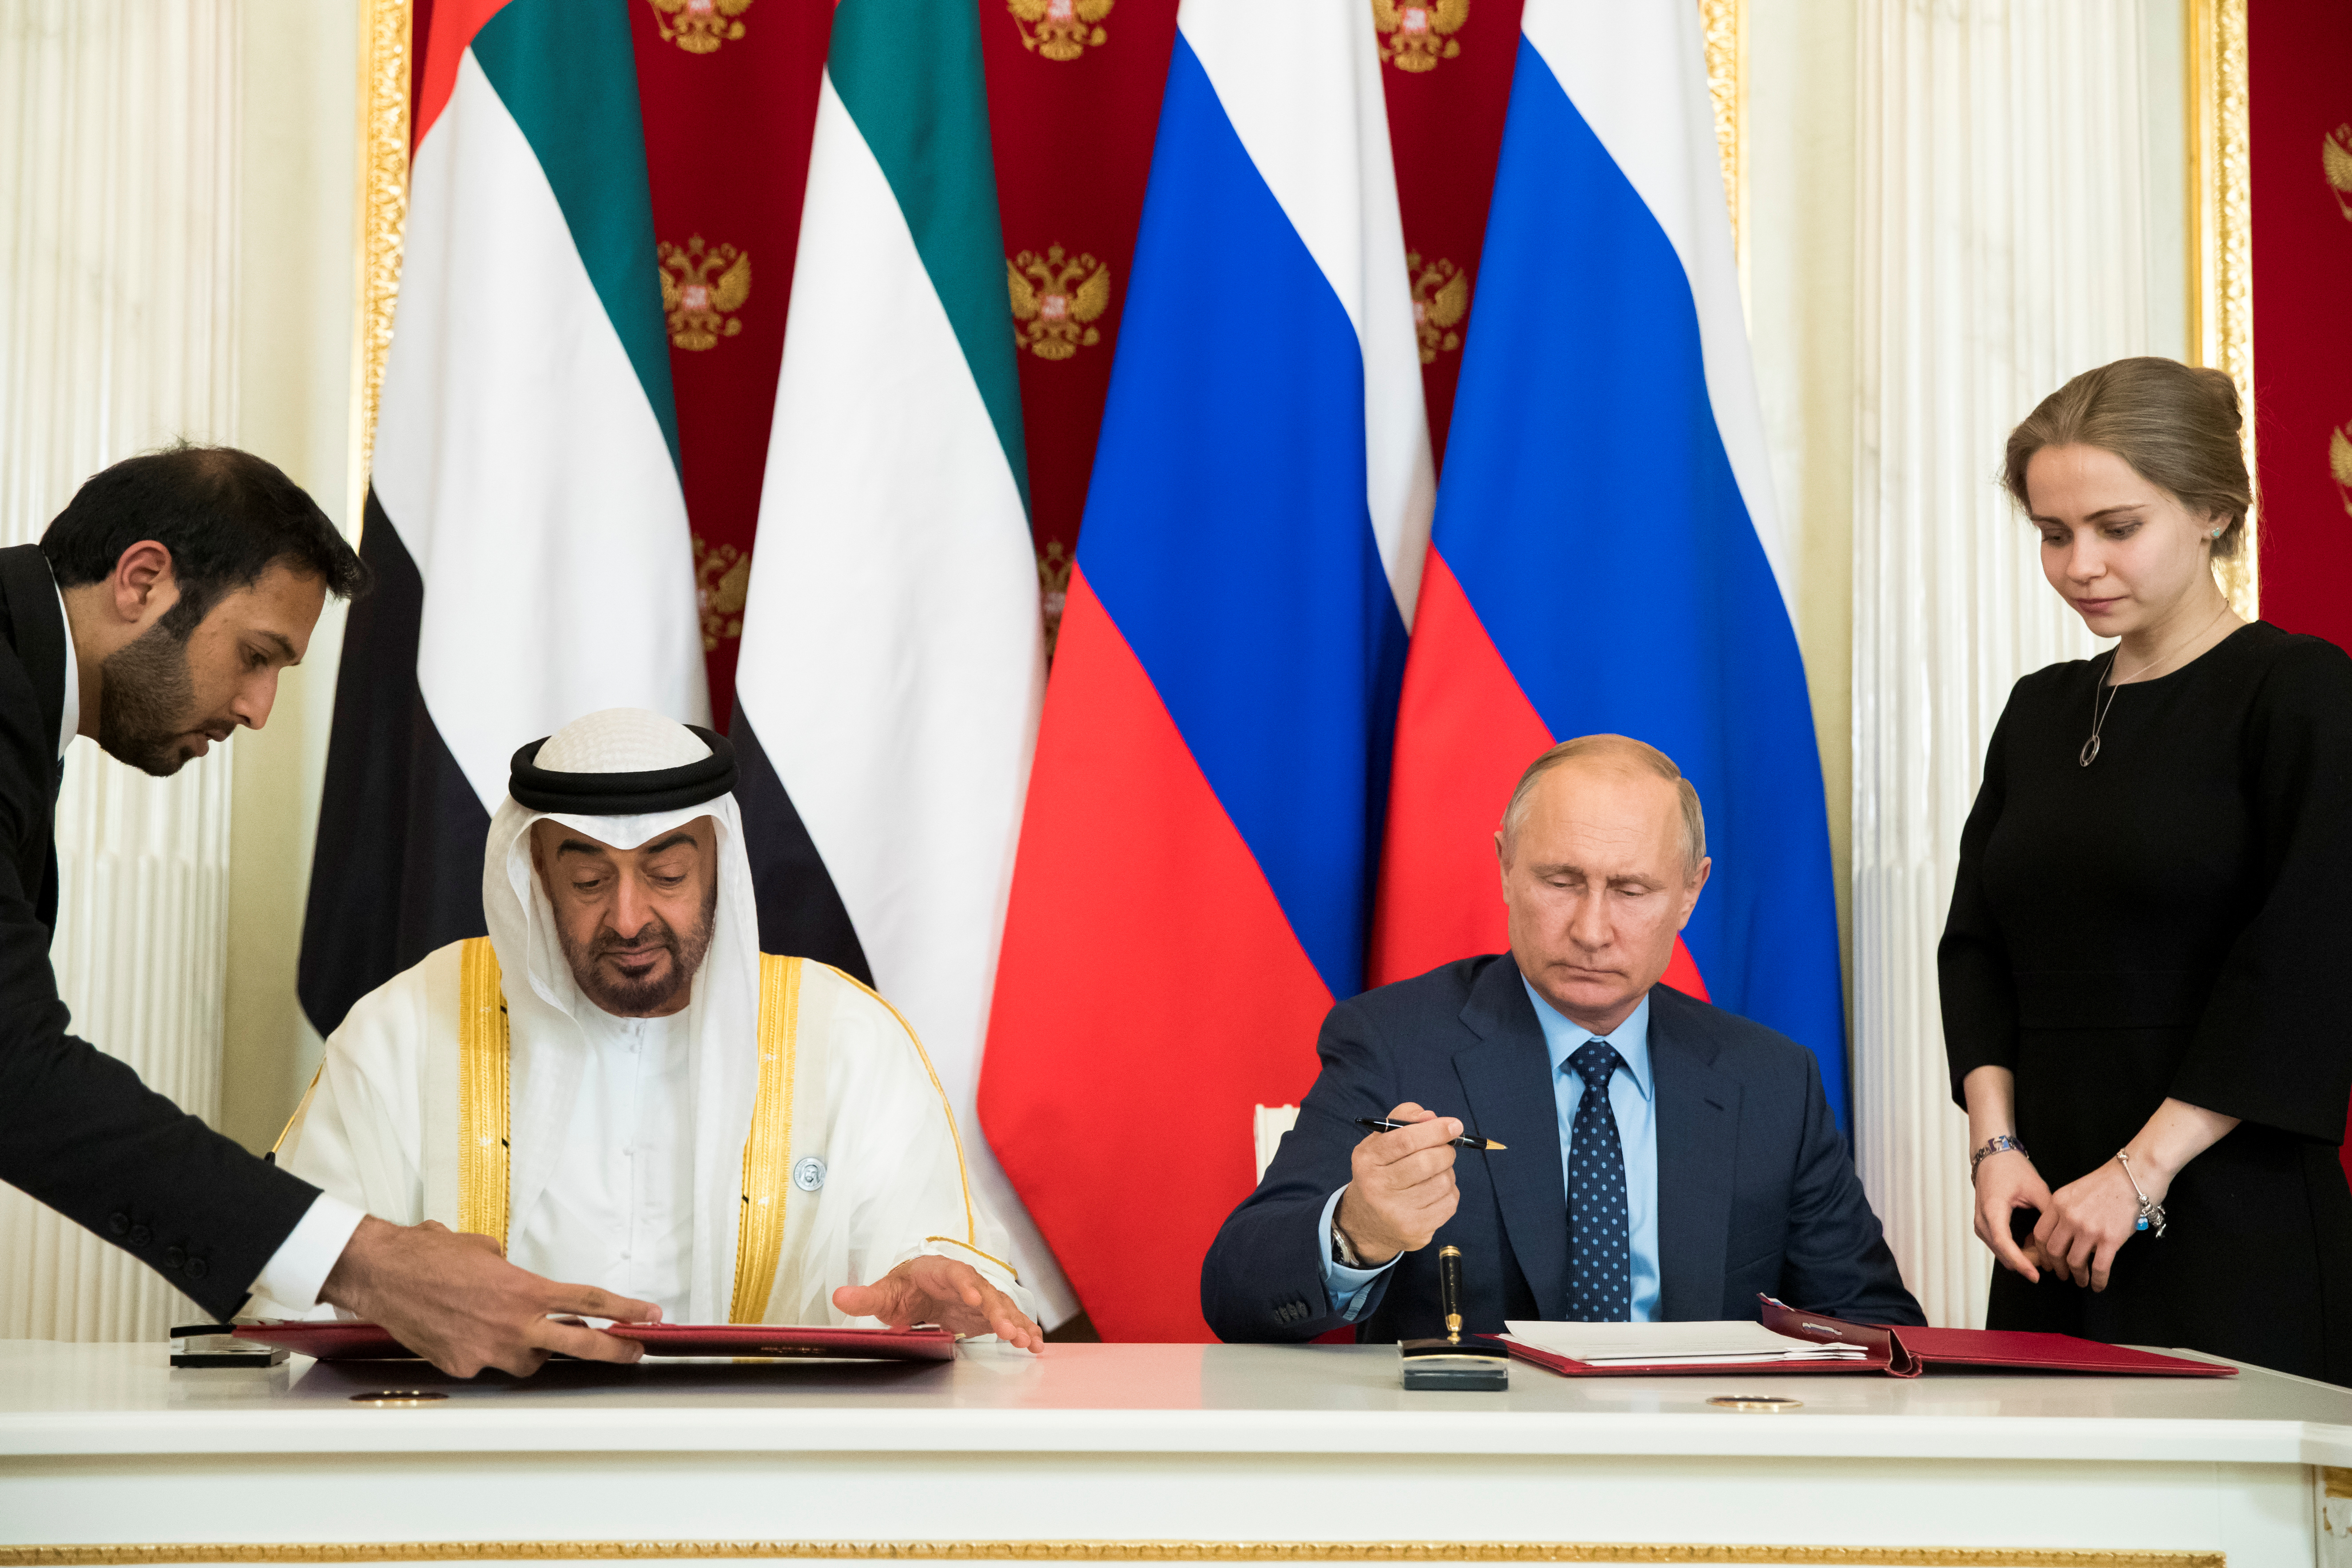 Russian President Vladimir Putin meets with Abu Dhabi's Crown Prince Sheikh Mohammed bin Zayed al-Nahyan of the United Arab Emirates in Moscow